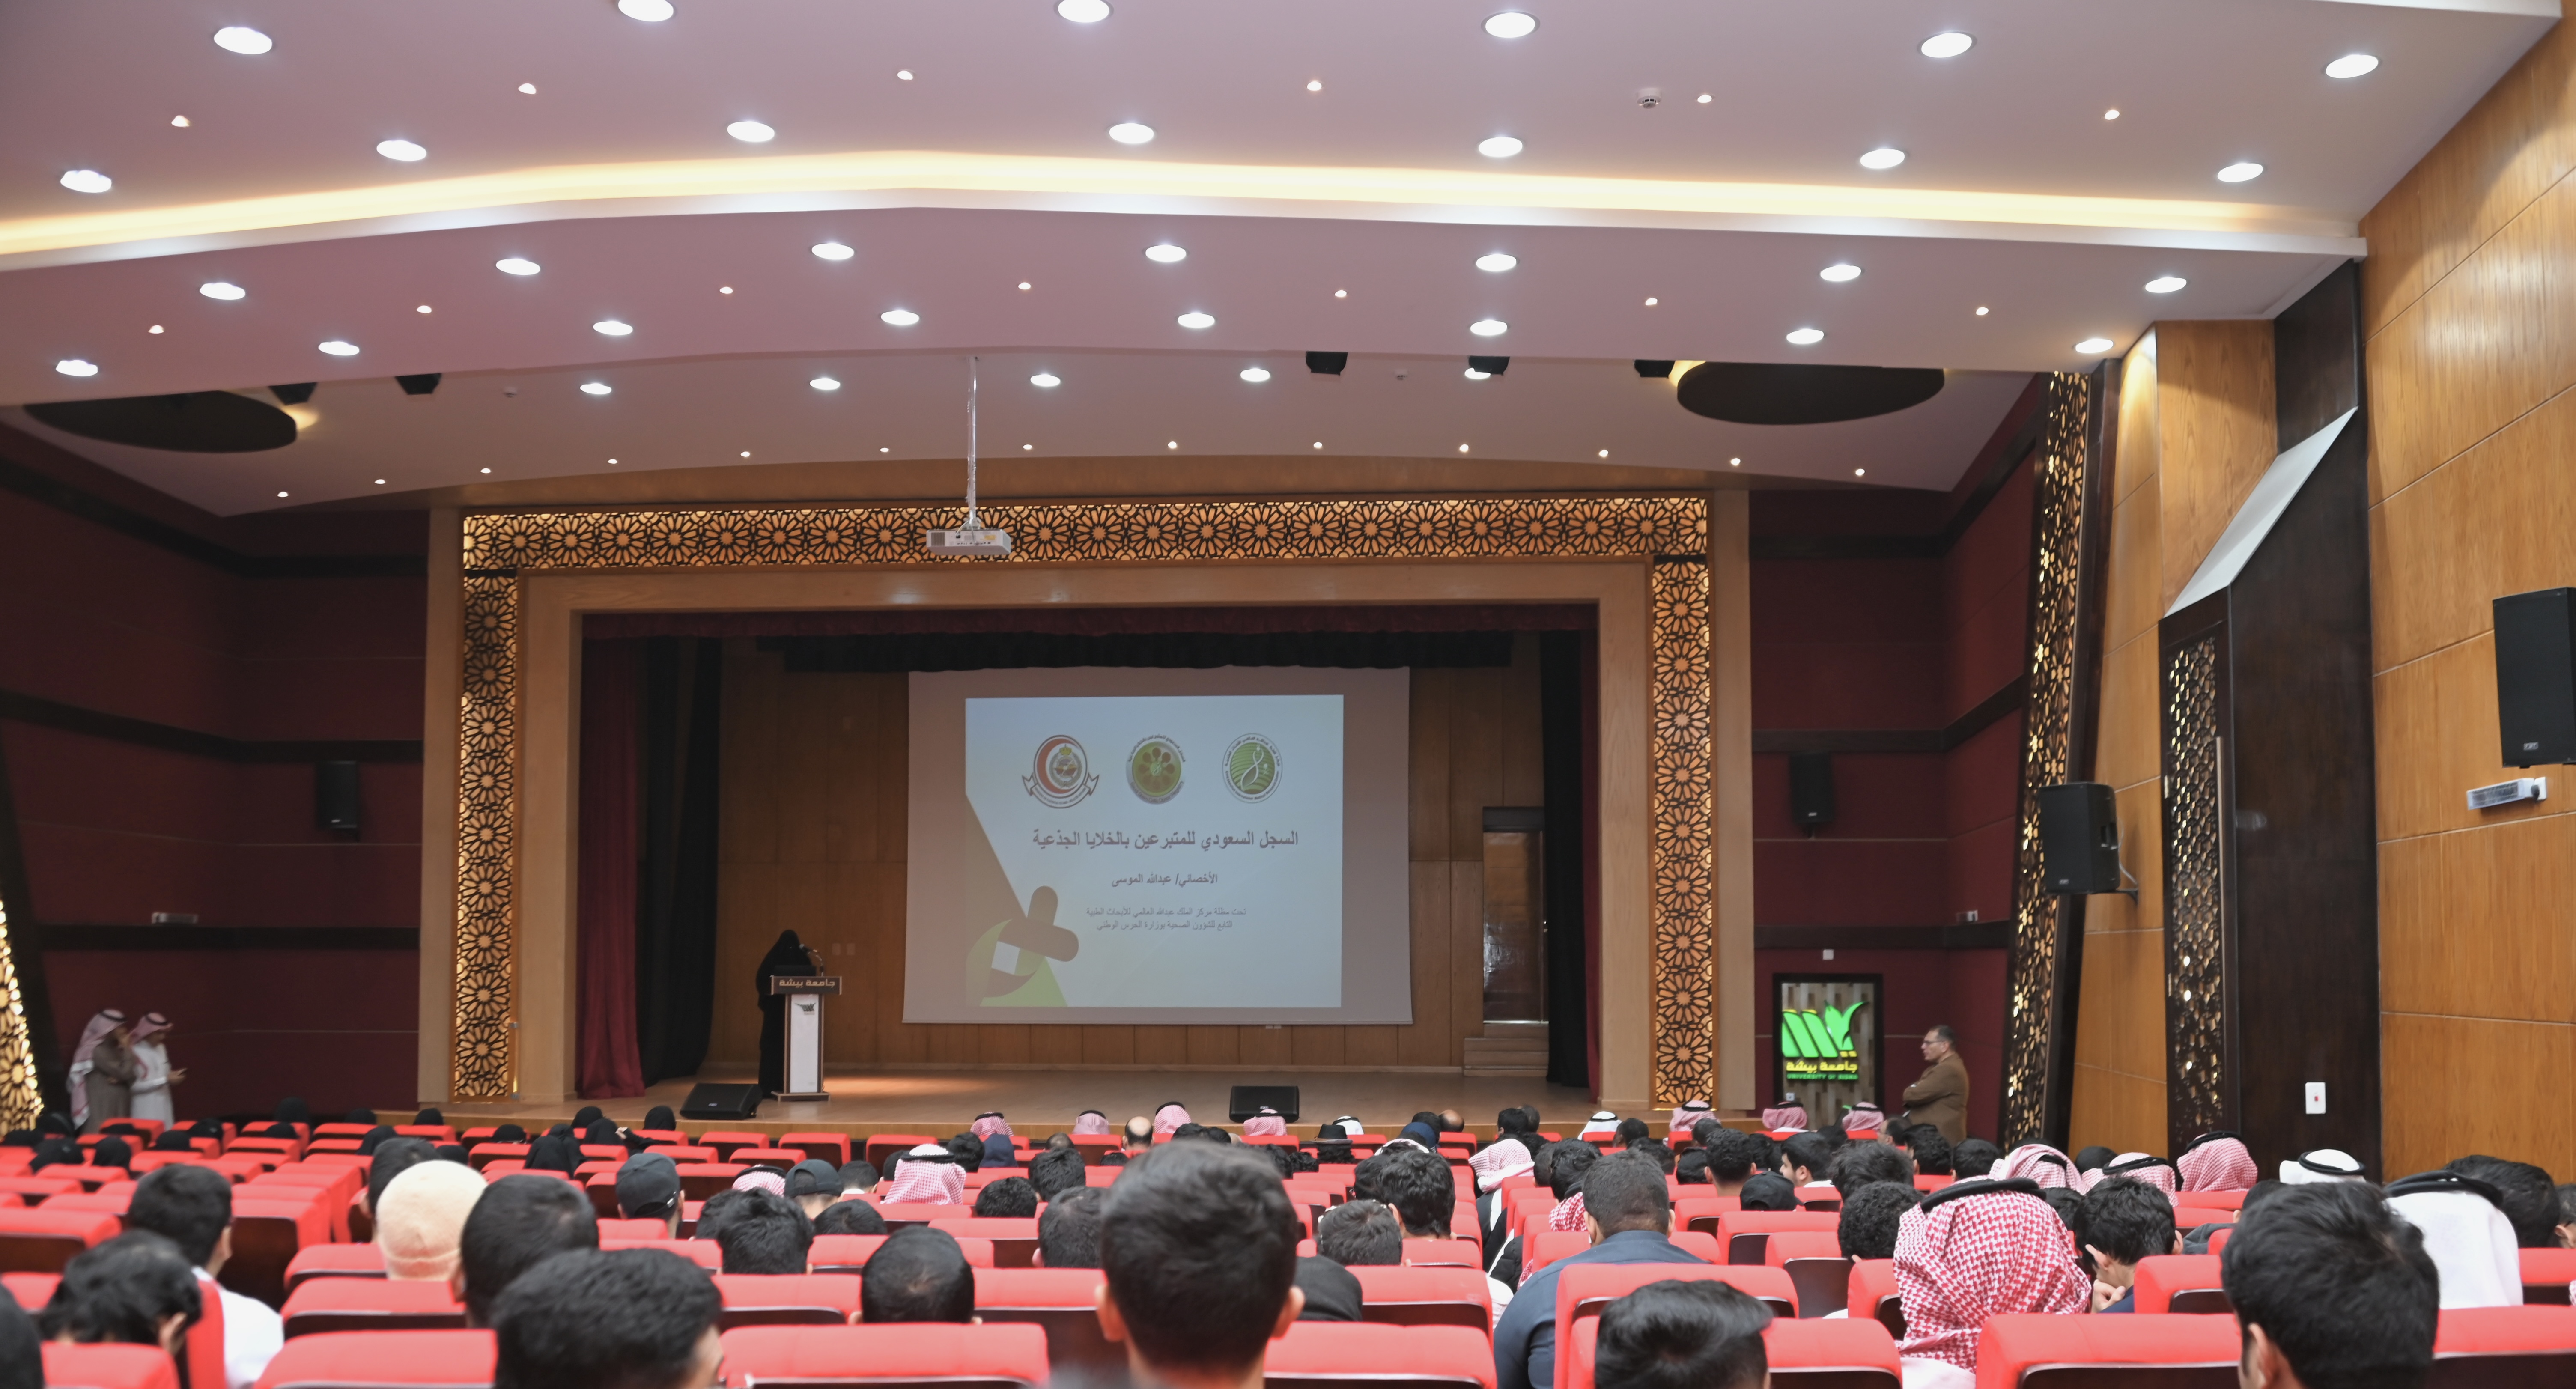 The inauguration of the Saudi Registry of Stem Cell Donors of the King Abdullah International Medical Research Center at the University of Bisha